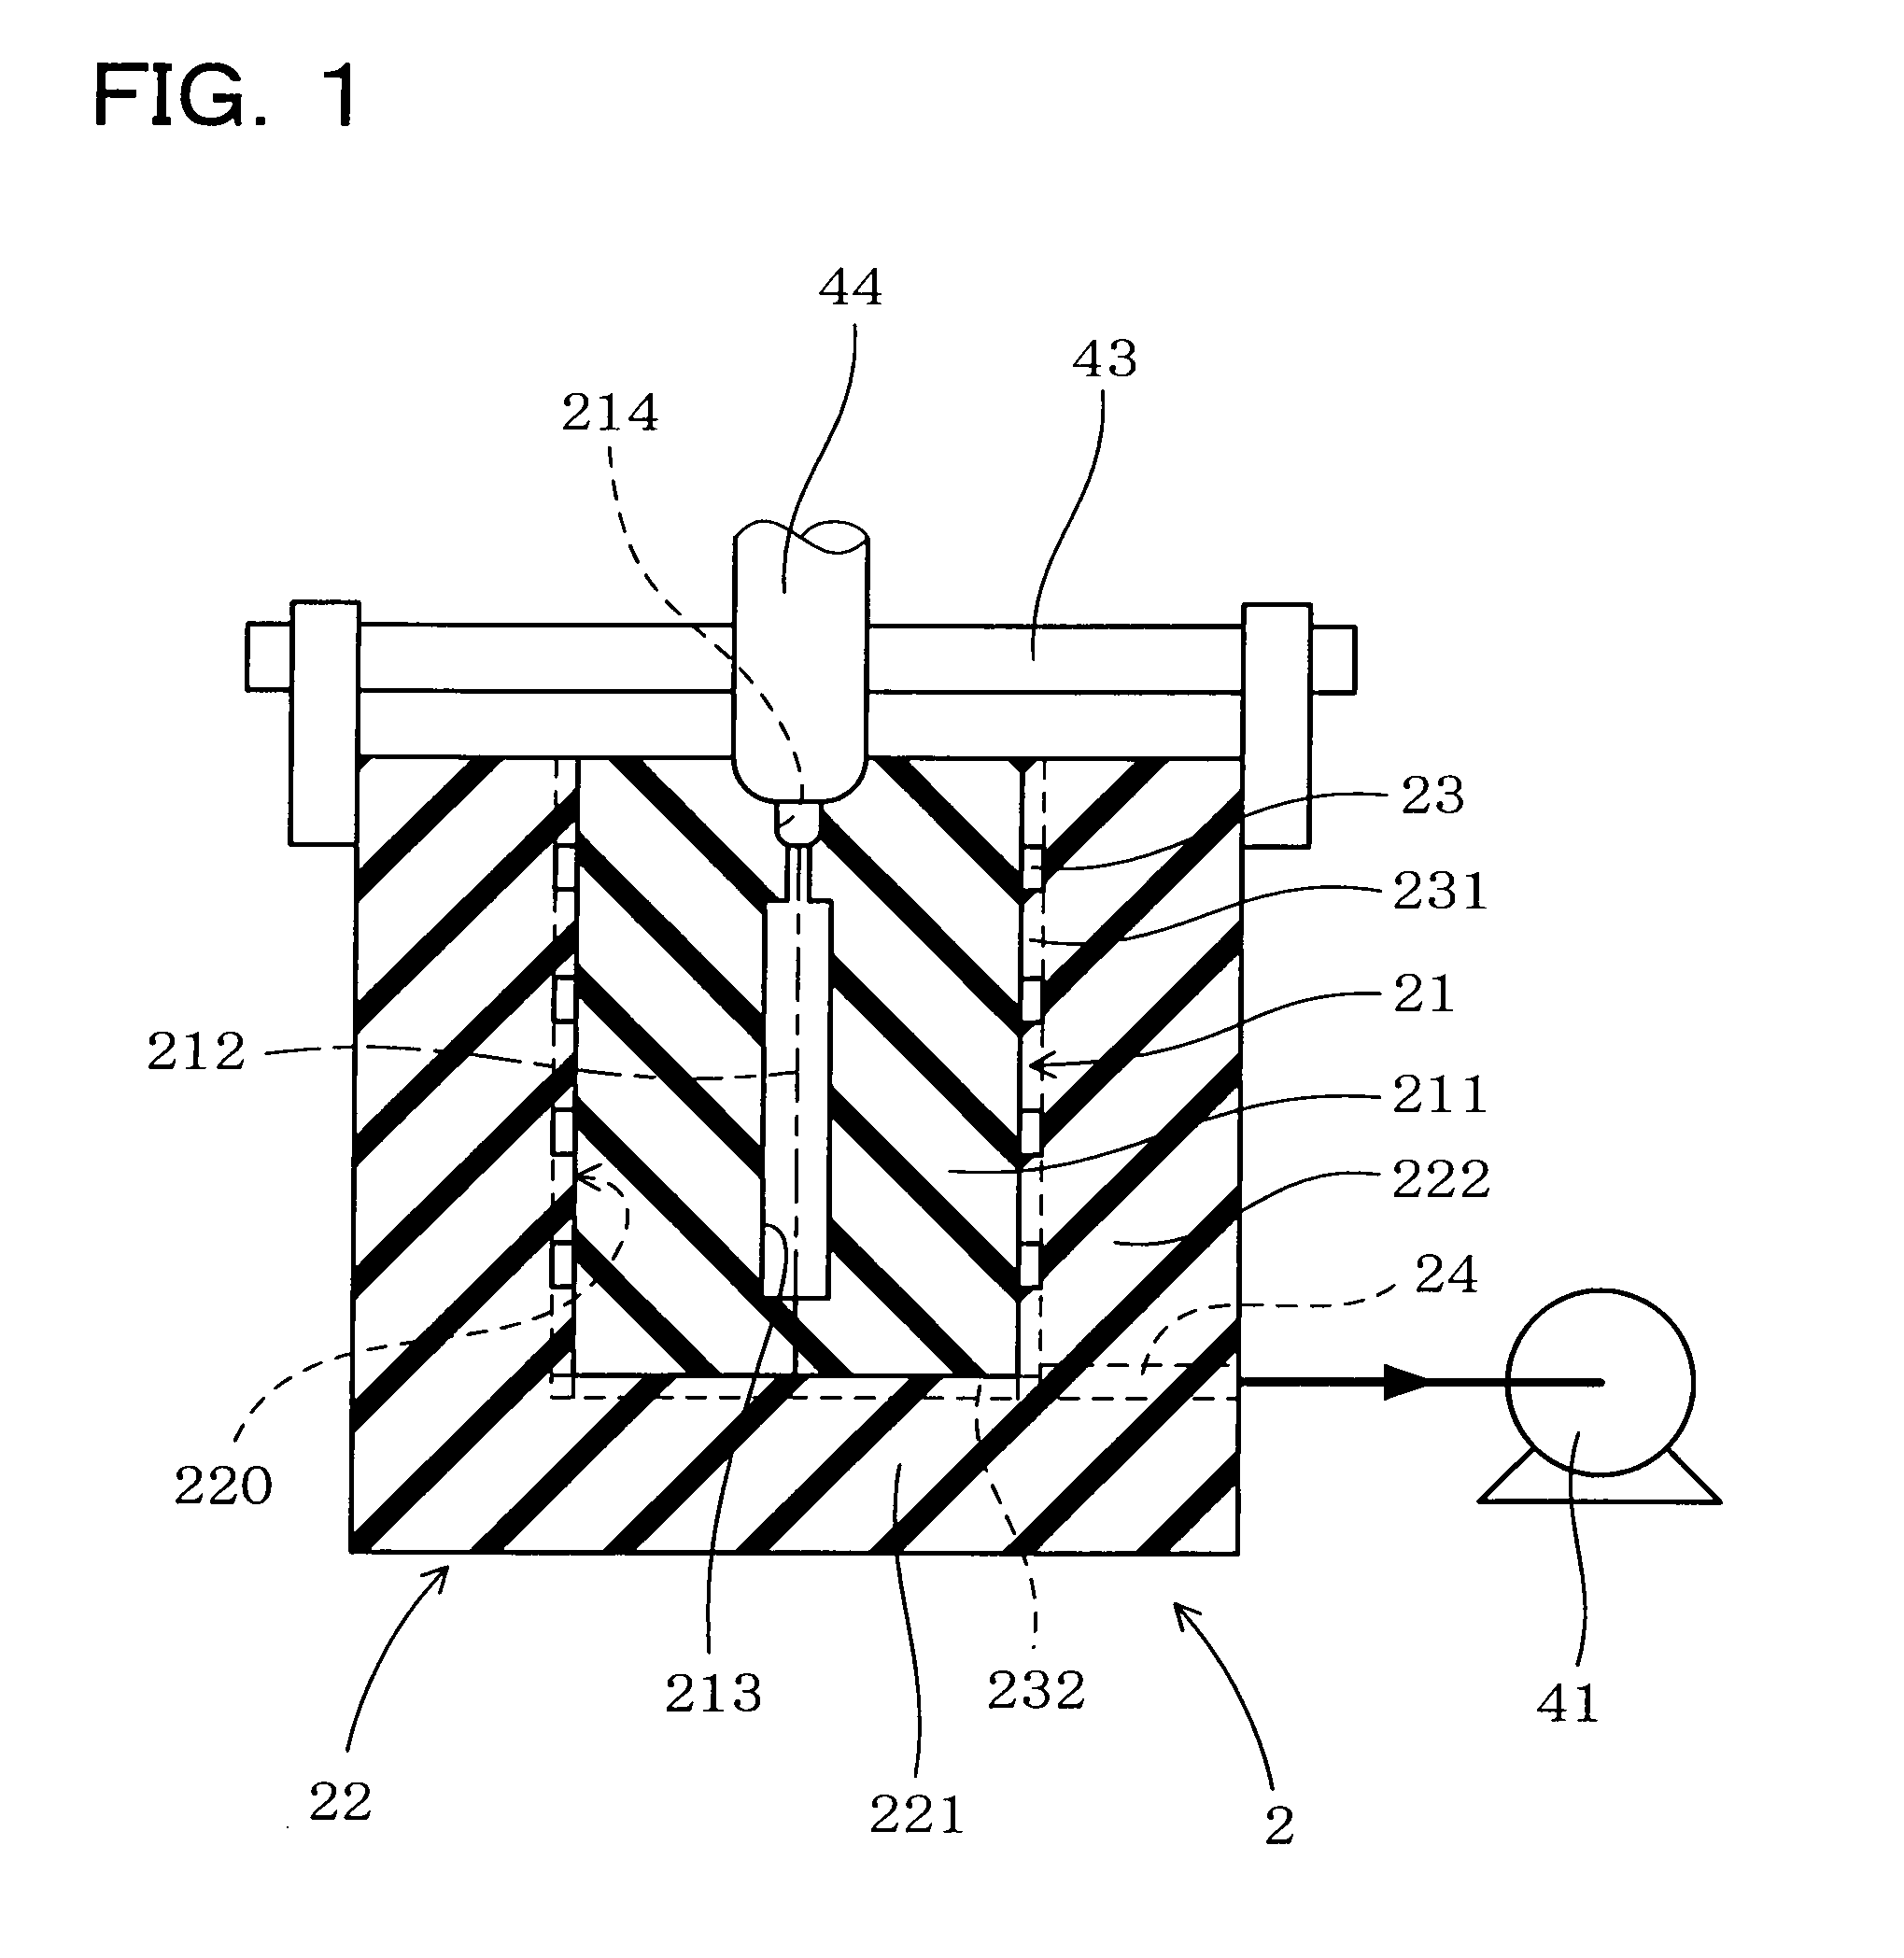 Mold for molding resin, apparatus for molding resin, and method for molding resin